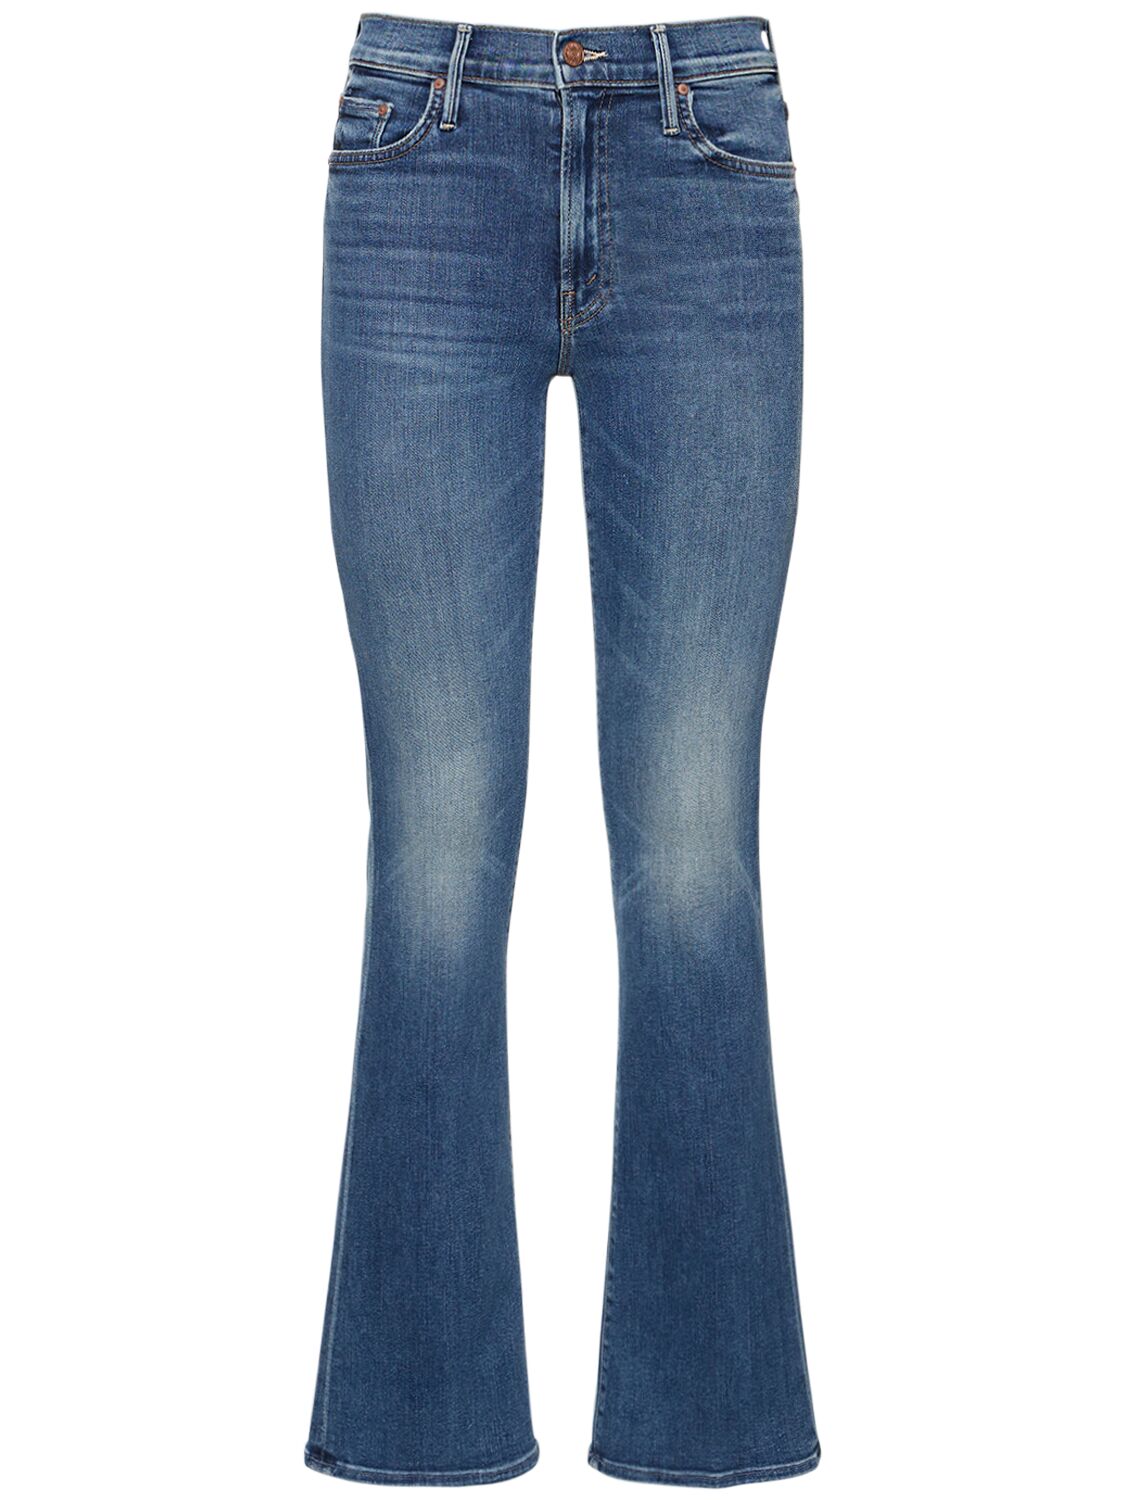 The Outsider Sneak Mid Rise Cotton Jeans